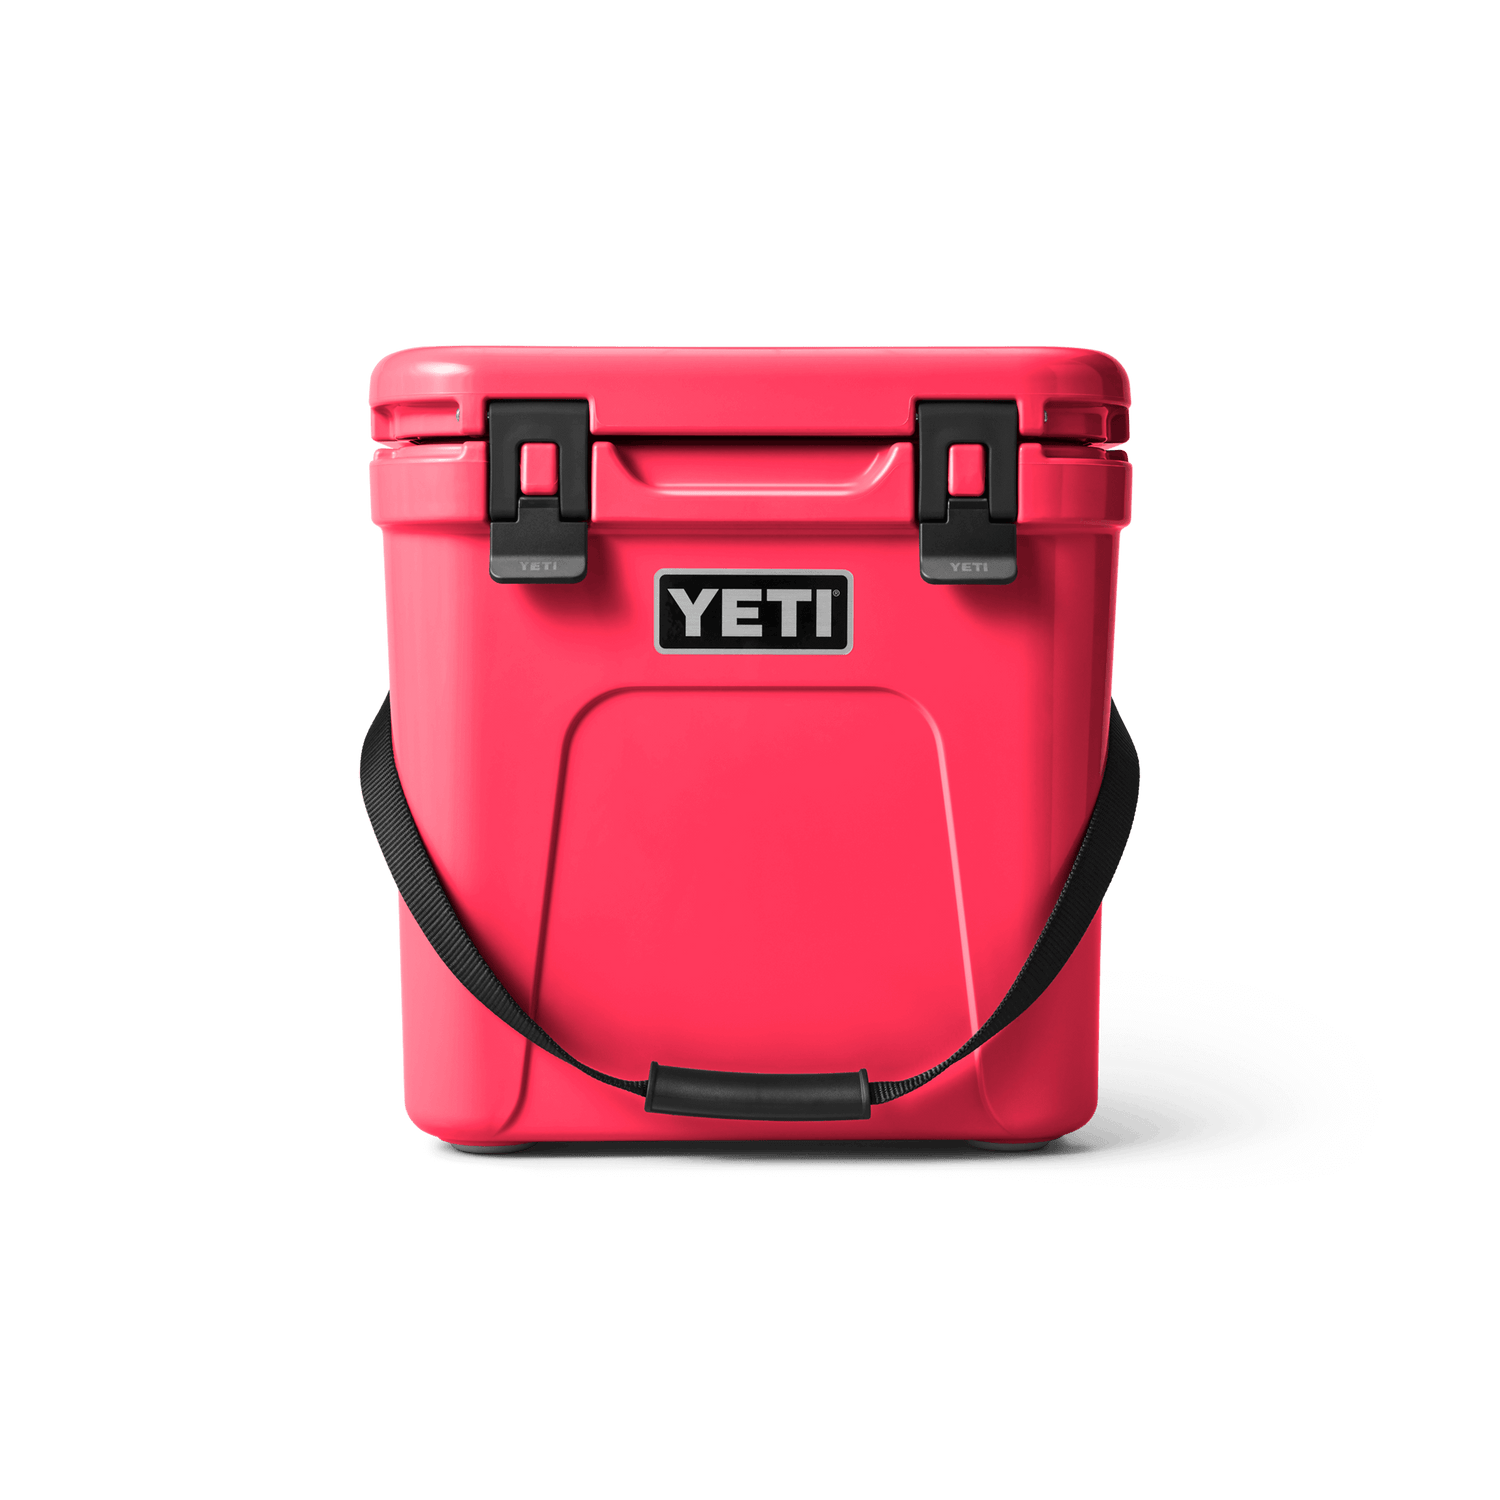 YETI Tundra Haul Wheeled Insulated Chest Cooler, Harvest Red at